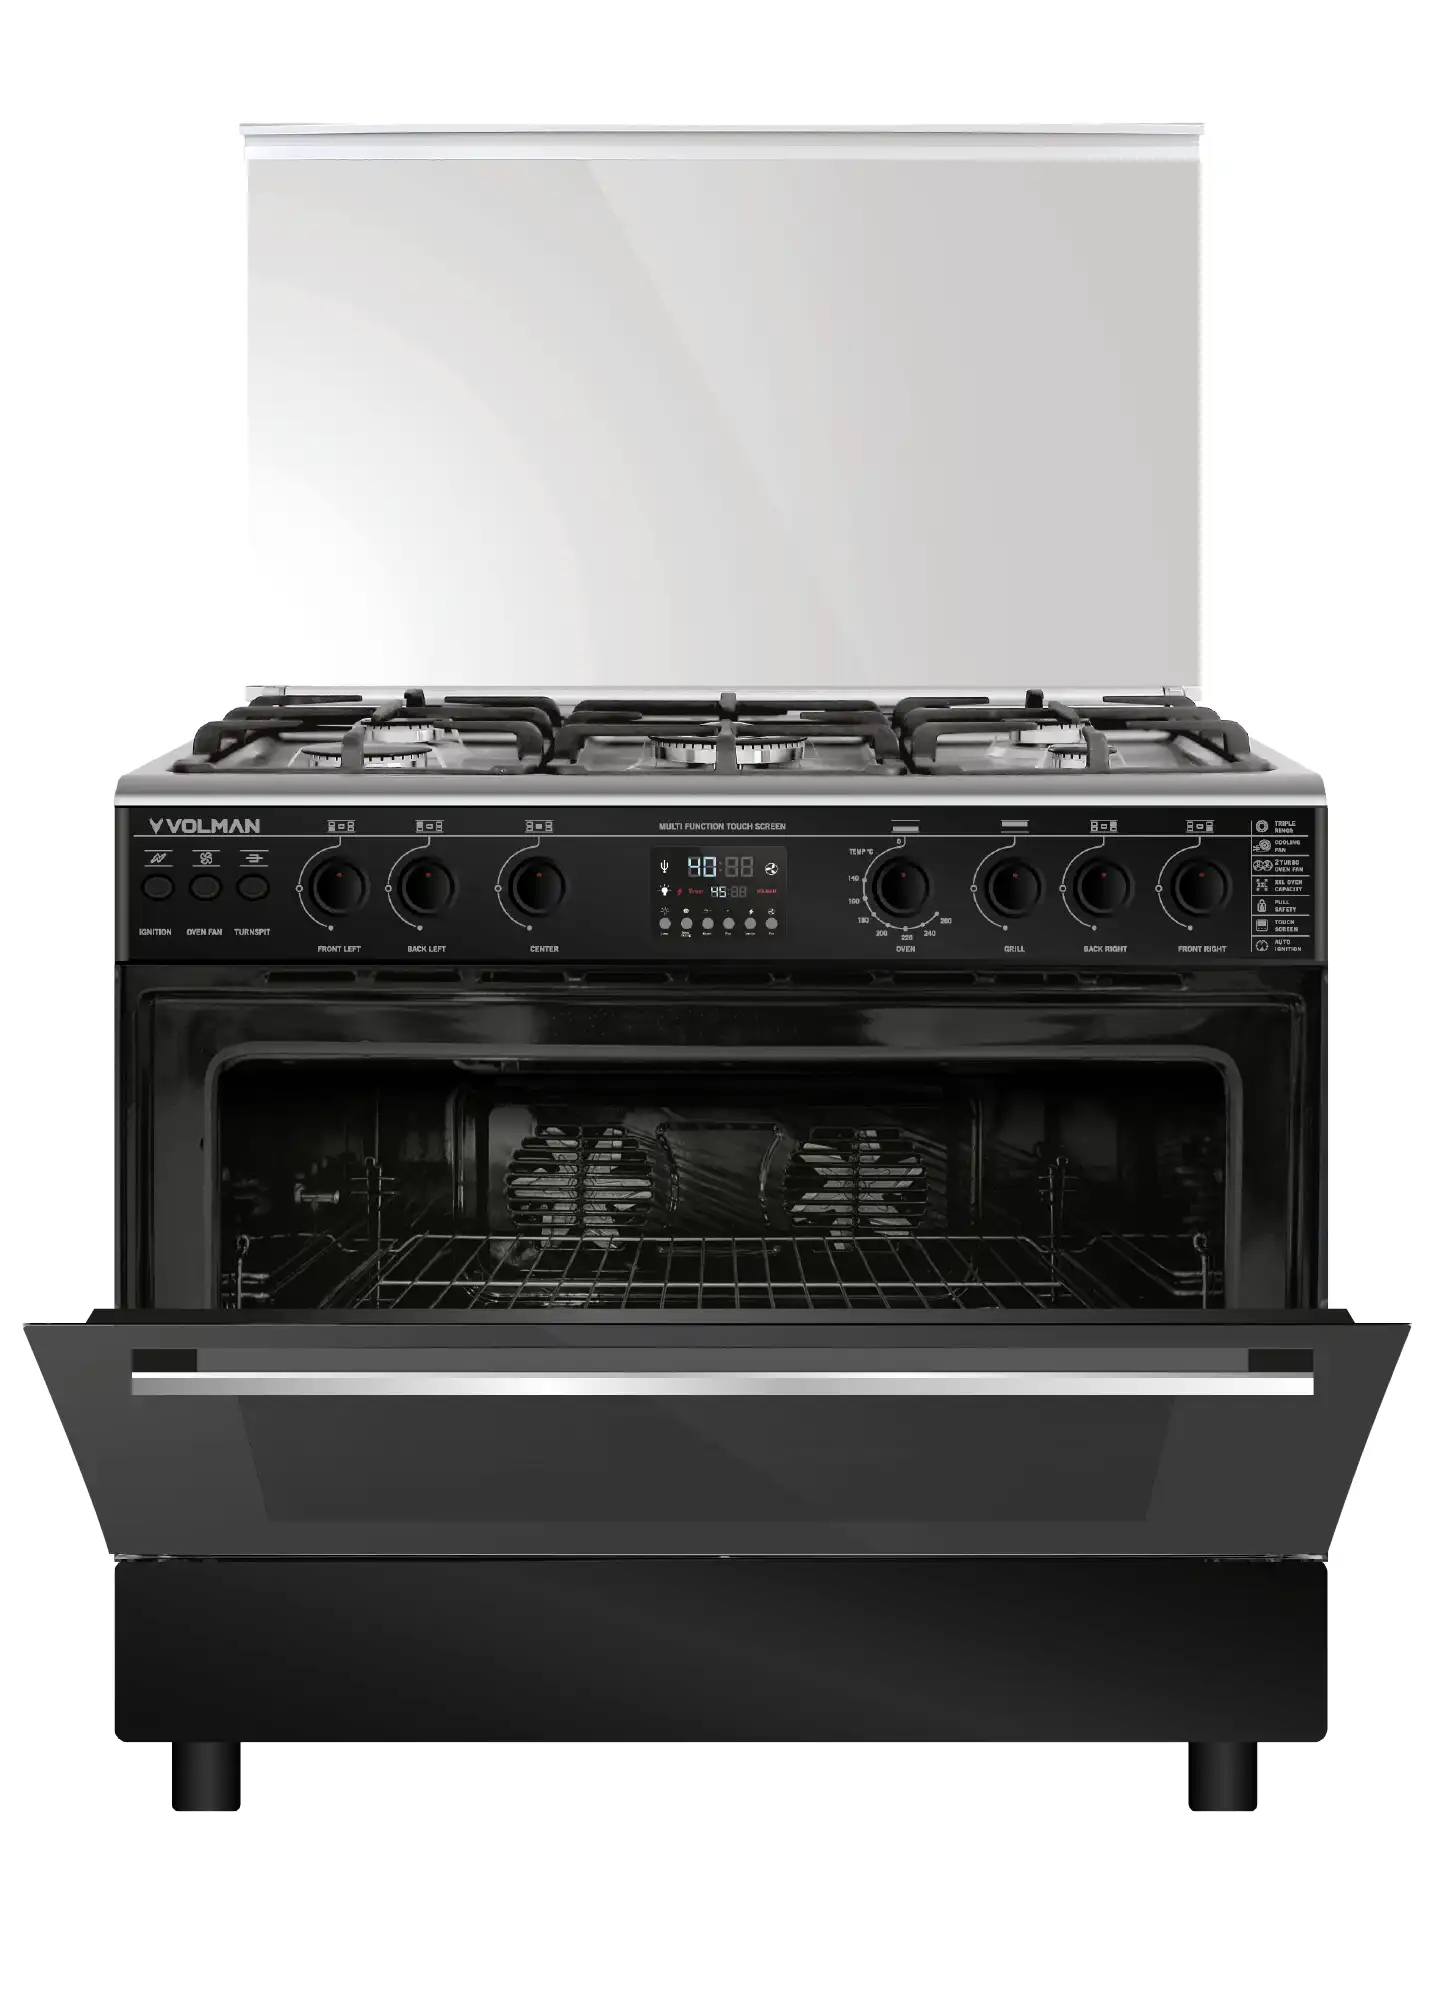 Fullman Icon Gas Cooker, 90 x 60 cm, 5 burners, full safety, touch screen, cooling and distribution fan, black, stainless steel, VLGC9T2CSDP-101BL